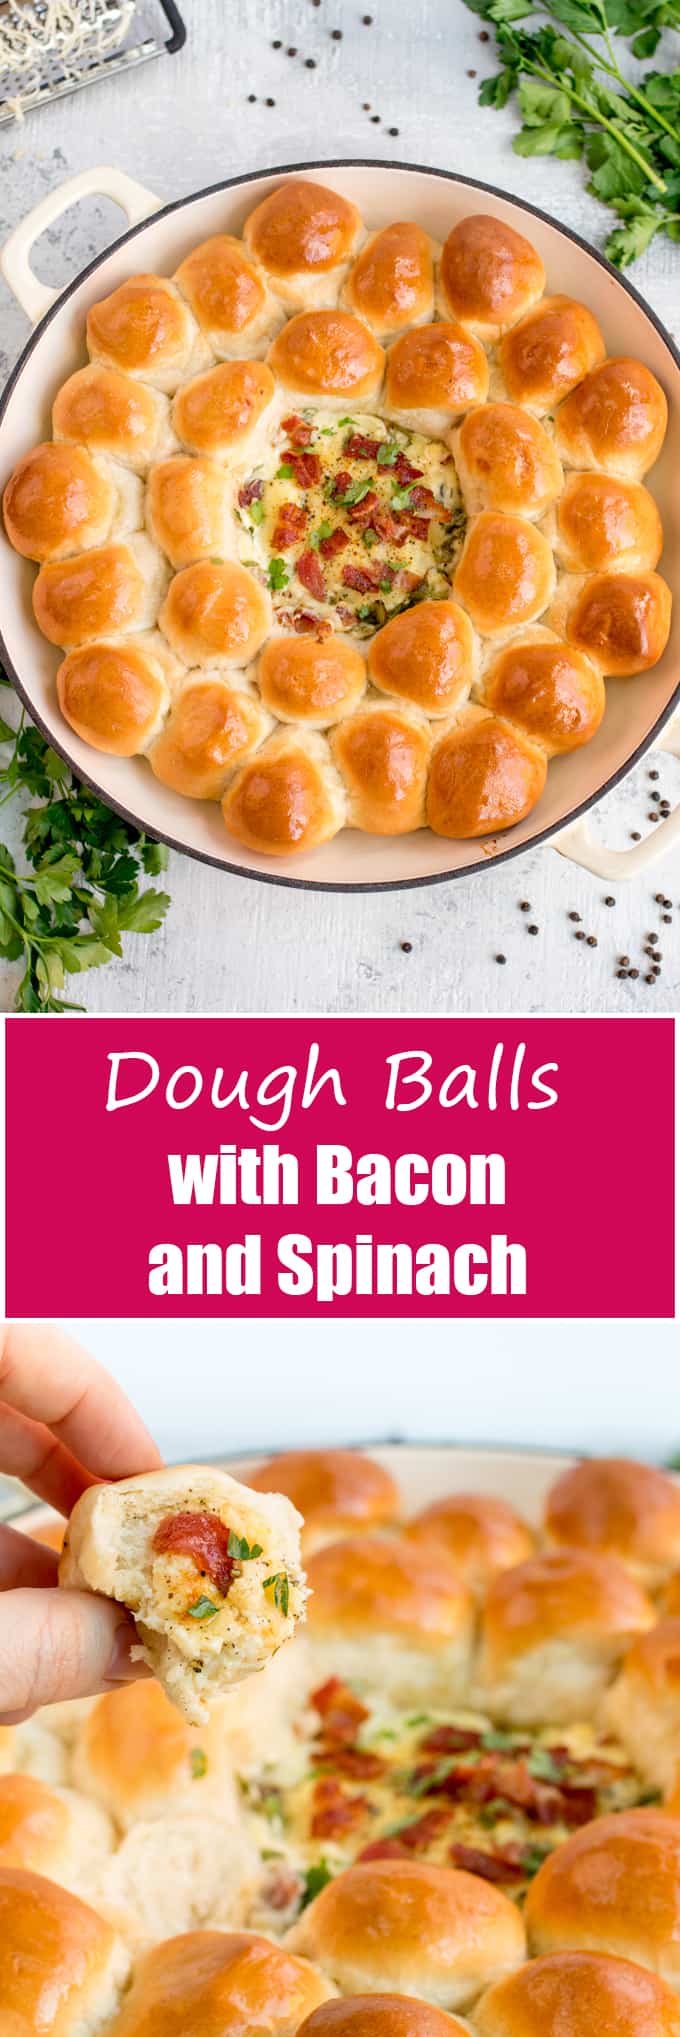 Dough Balls with Creamy Spinach and Bacon Dip - great for parties, BBQs or a family lunch where everyone can dig in!